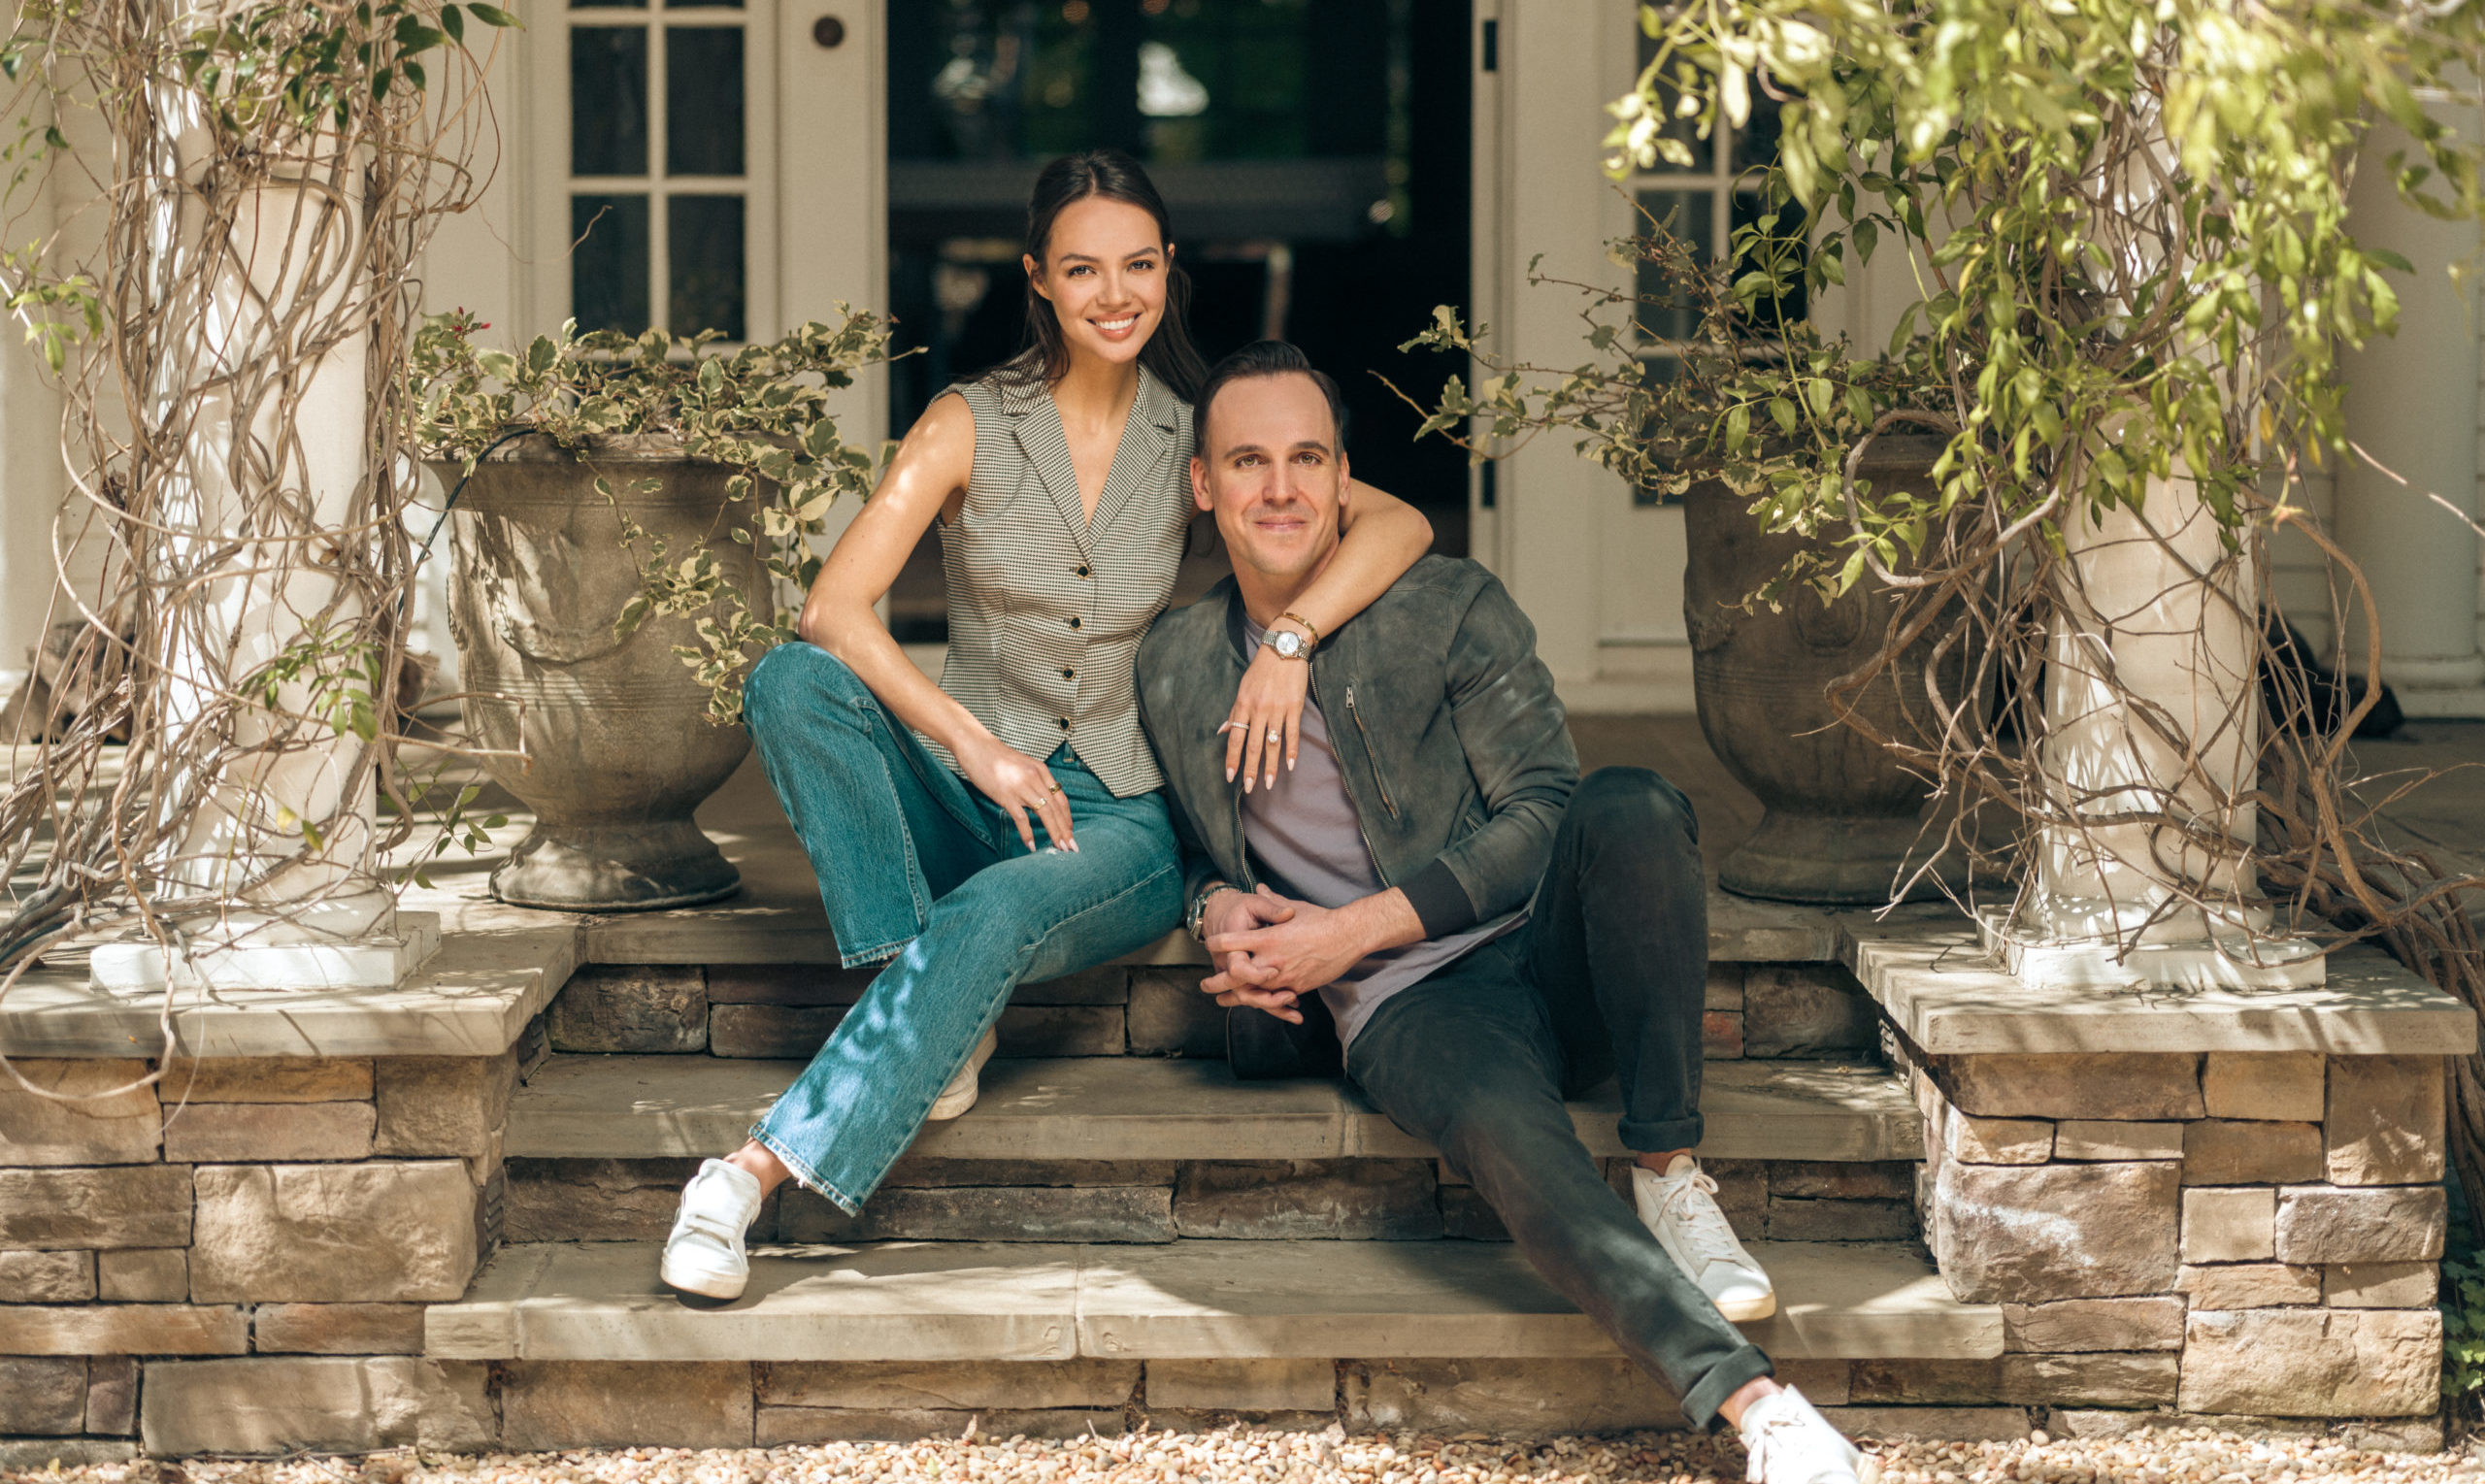 Meet The L.A. Power Couple with a Shared Passion for Investments, Innovation & Wellness